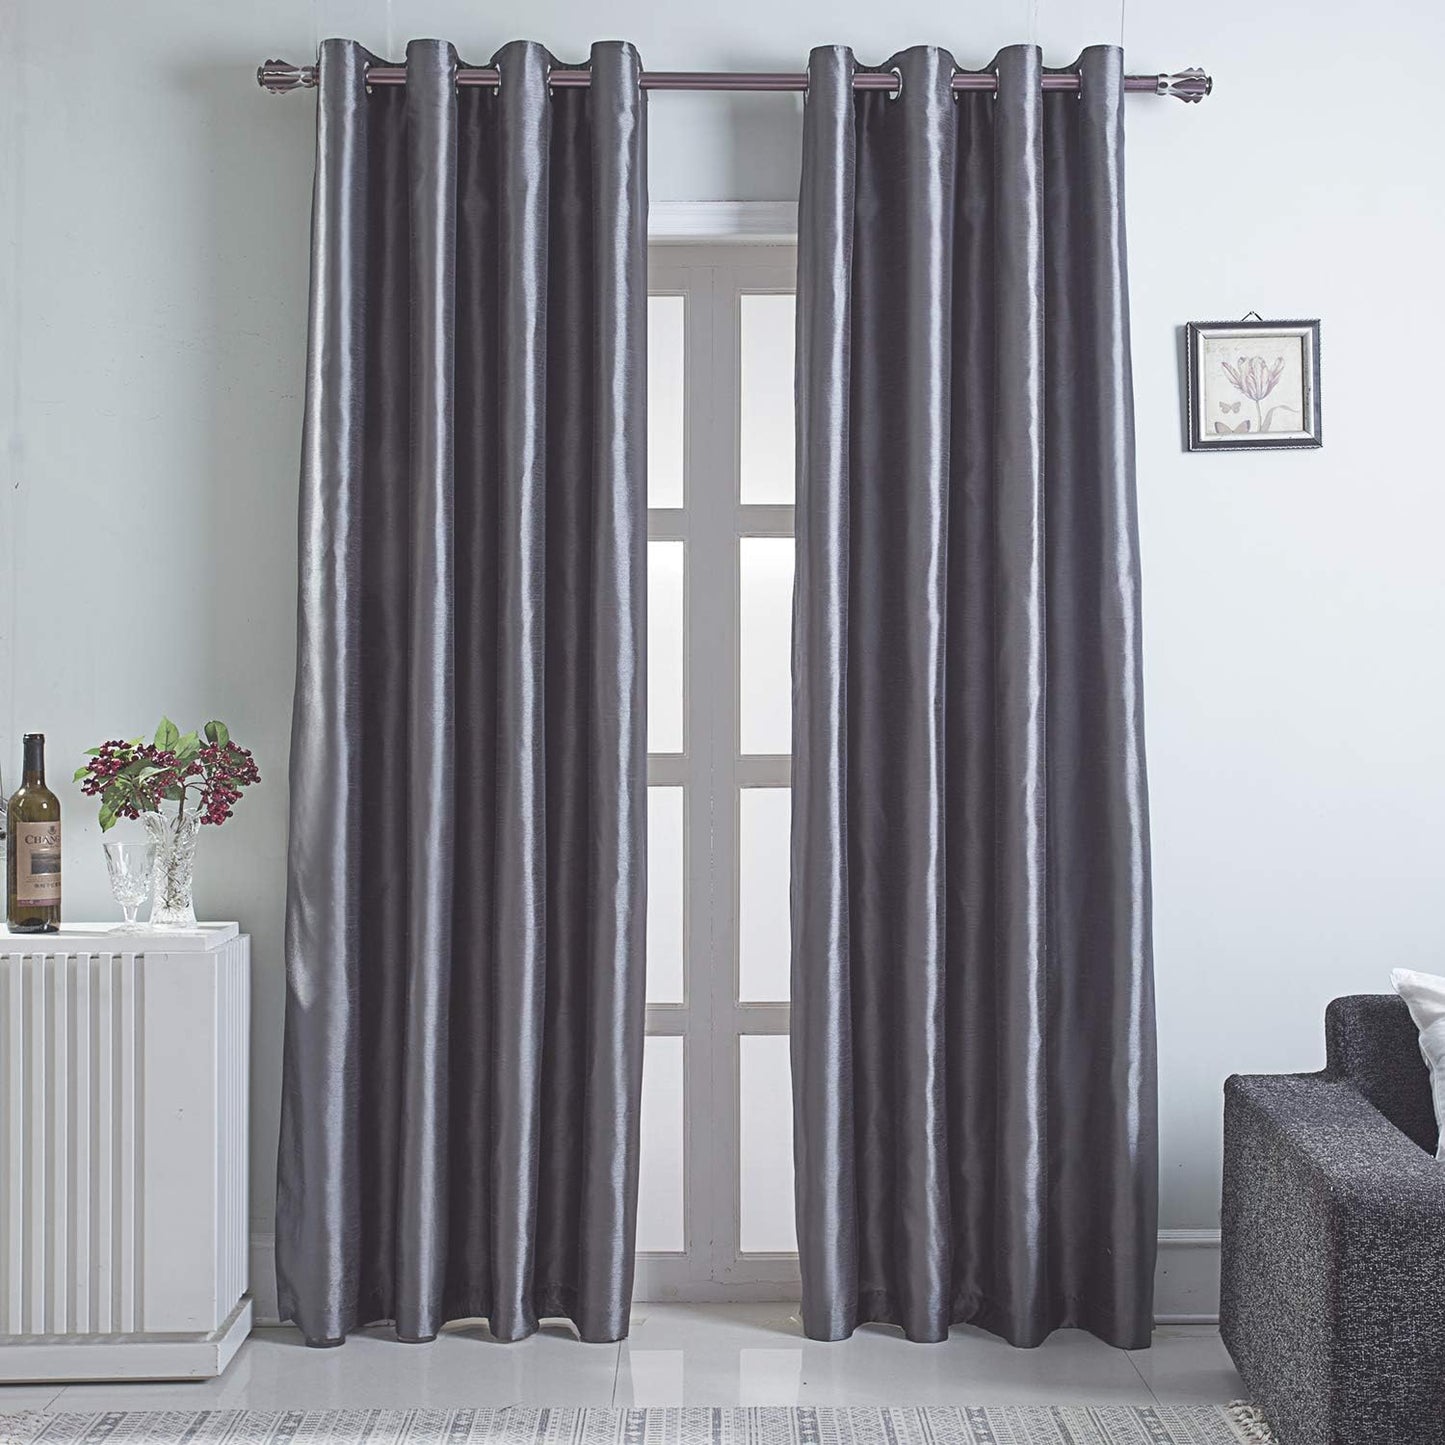 GYROHOME Faux Silk Room-Darkening Blackout Curtains (Beige Liner) Solid Window Treatment Drapes for Bedroom Living Room, Thermal Insulated Grommet Top (2Panels, 52X108Inch,Sliver Gray)  GYROHOME Grey 52Wx120Lx2 